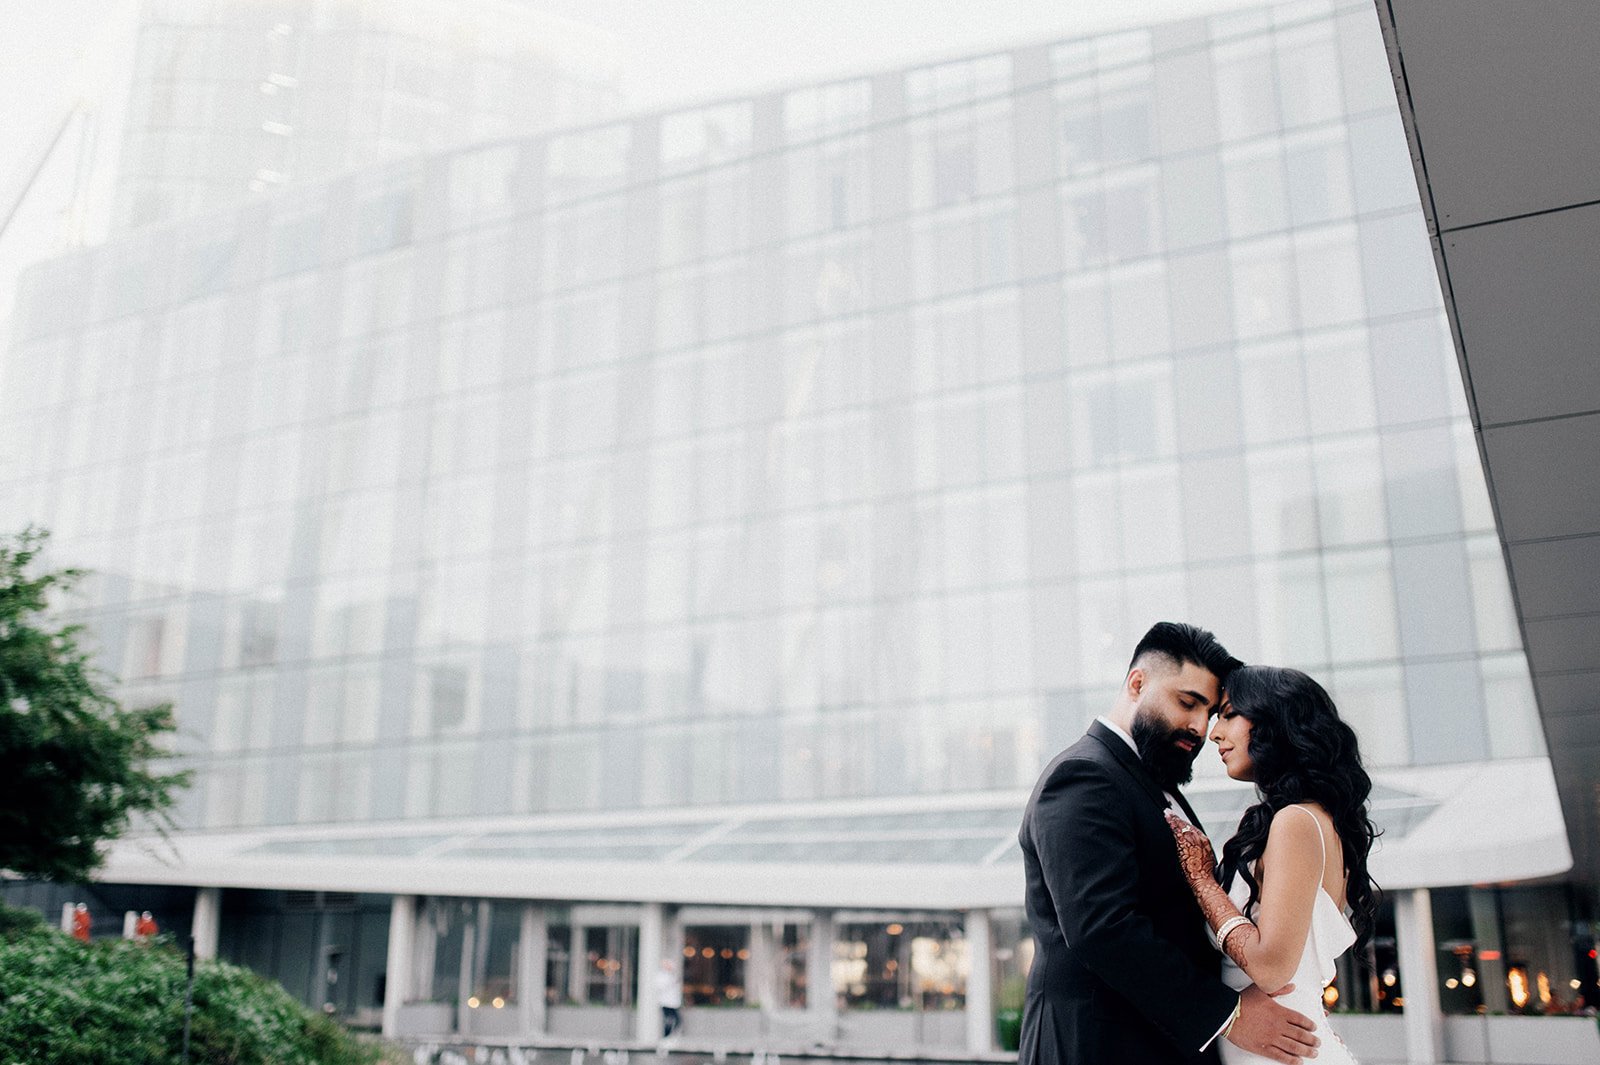 A bride and groom rest their heads together as they are dwarfed by a glass building.